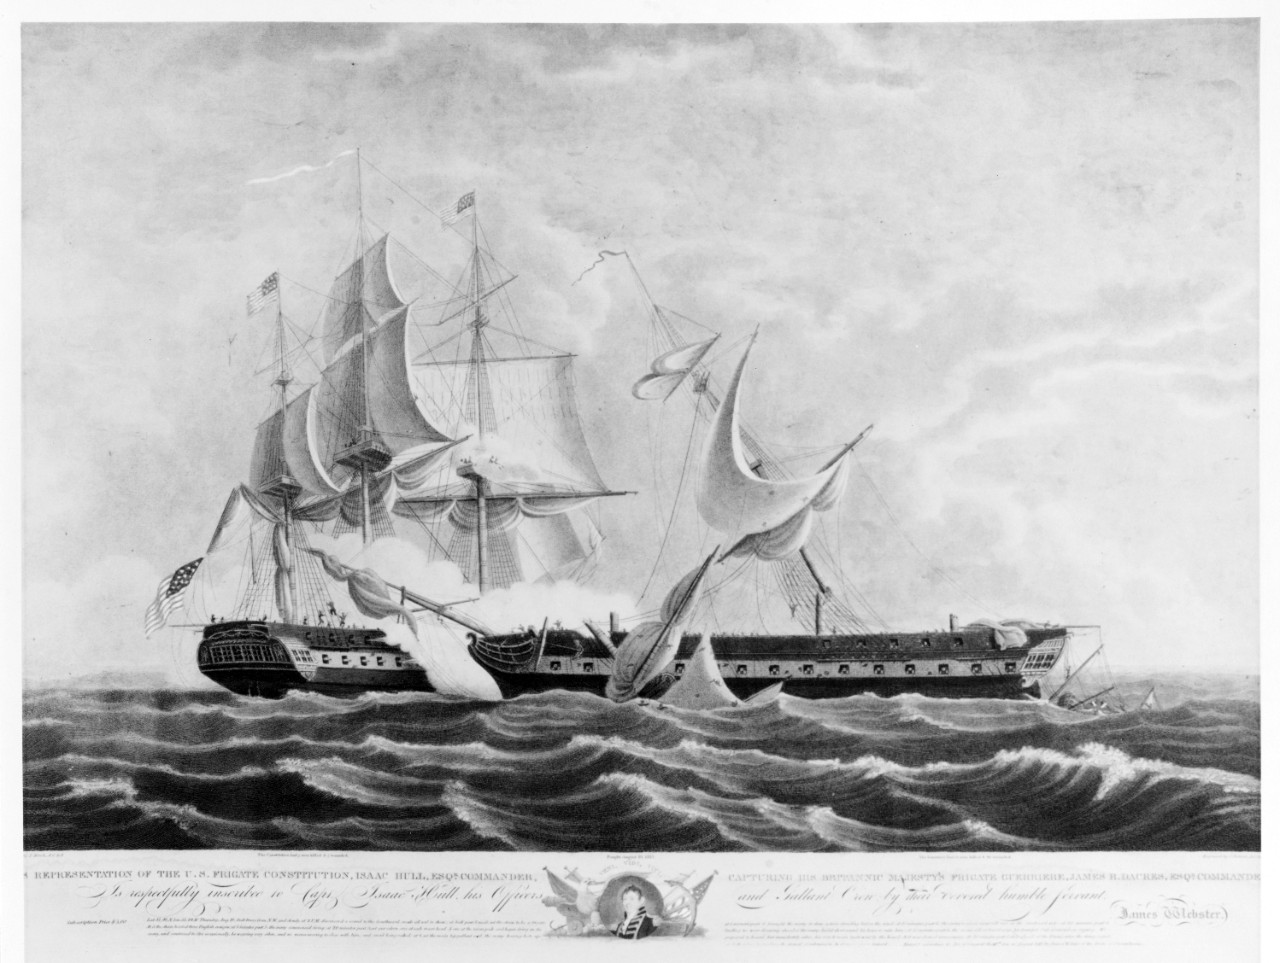 Photo #: NH 93905-KN  Action between USS Constitution and HMS Guerriere, 19 August 1812